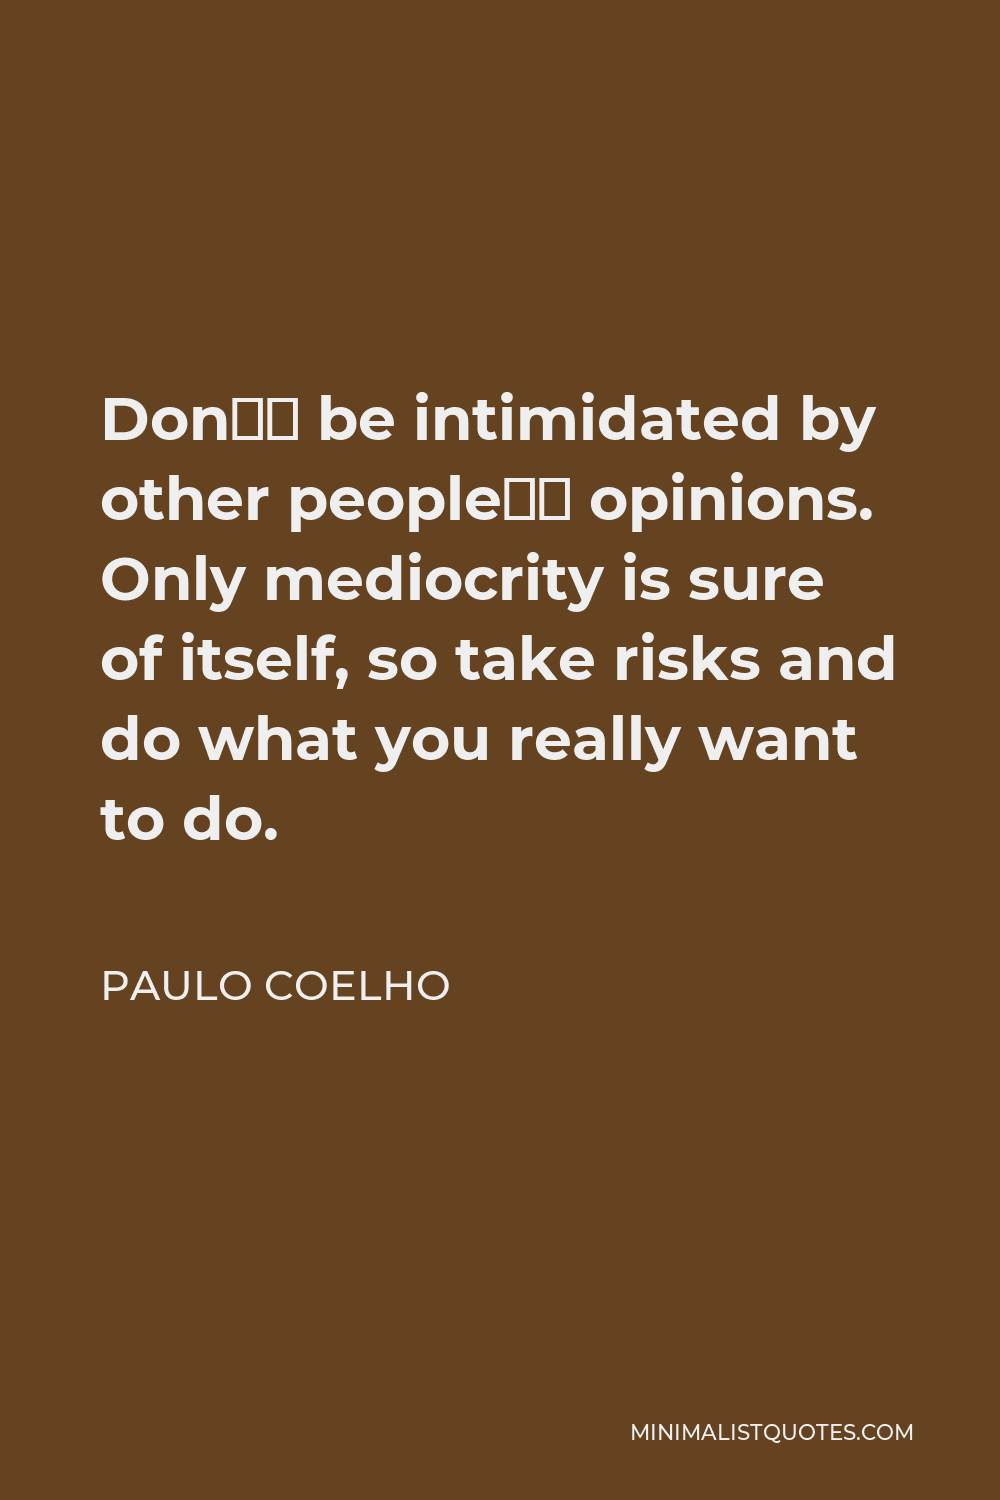 Paulo Coelho Quote - Don’t be intimidated by other people’s opinions. Only mediocrity is sure of itself, so take risks and do what you really want to do.